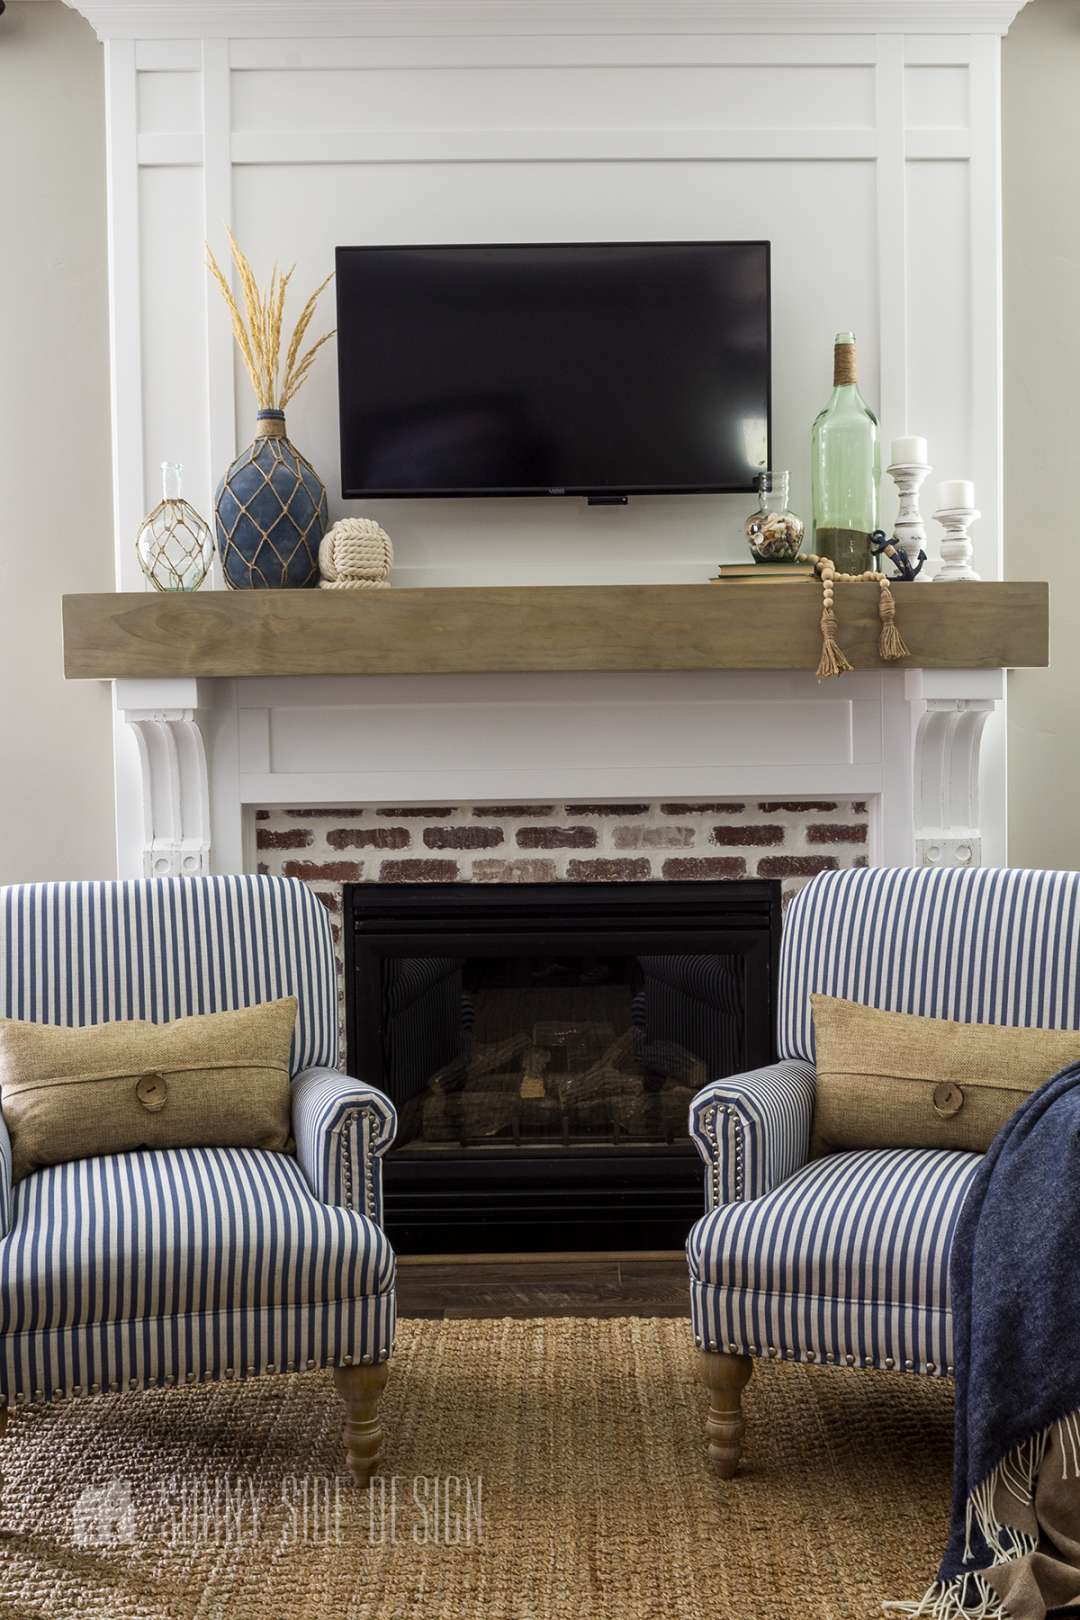 Modern Mantel Decor With A TV:  Ways To Pull It Off  Chrissy